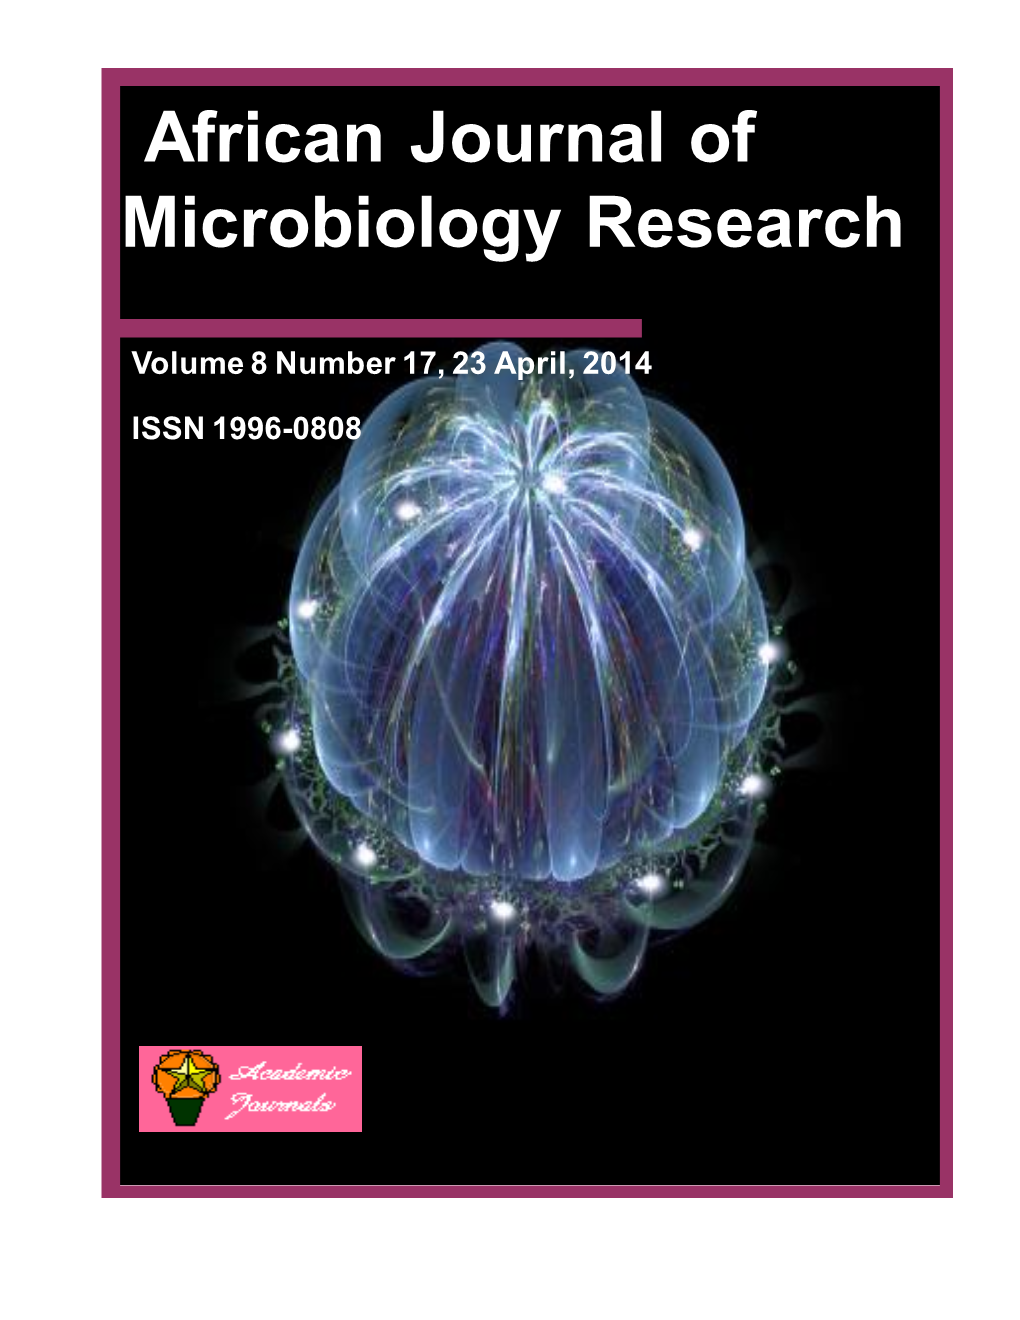 African Journal of Microbiology Research